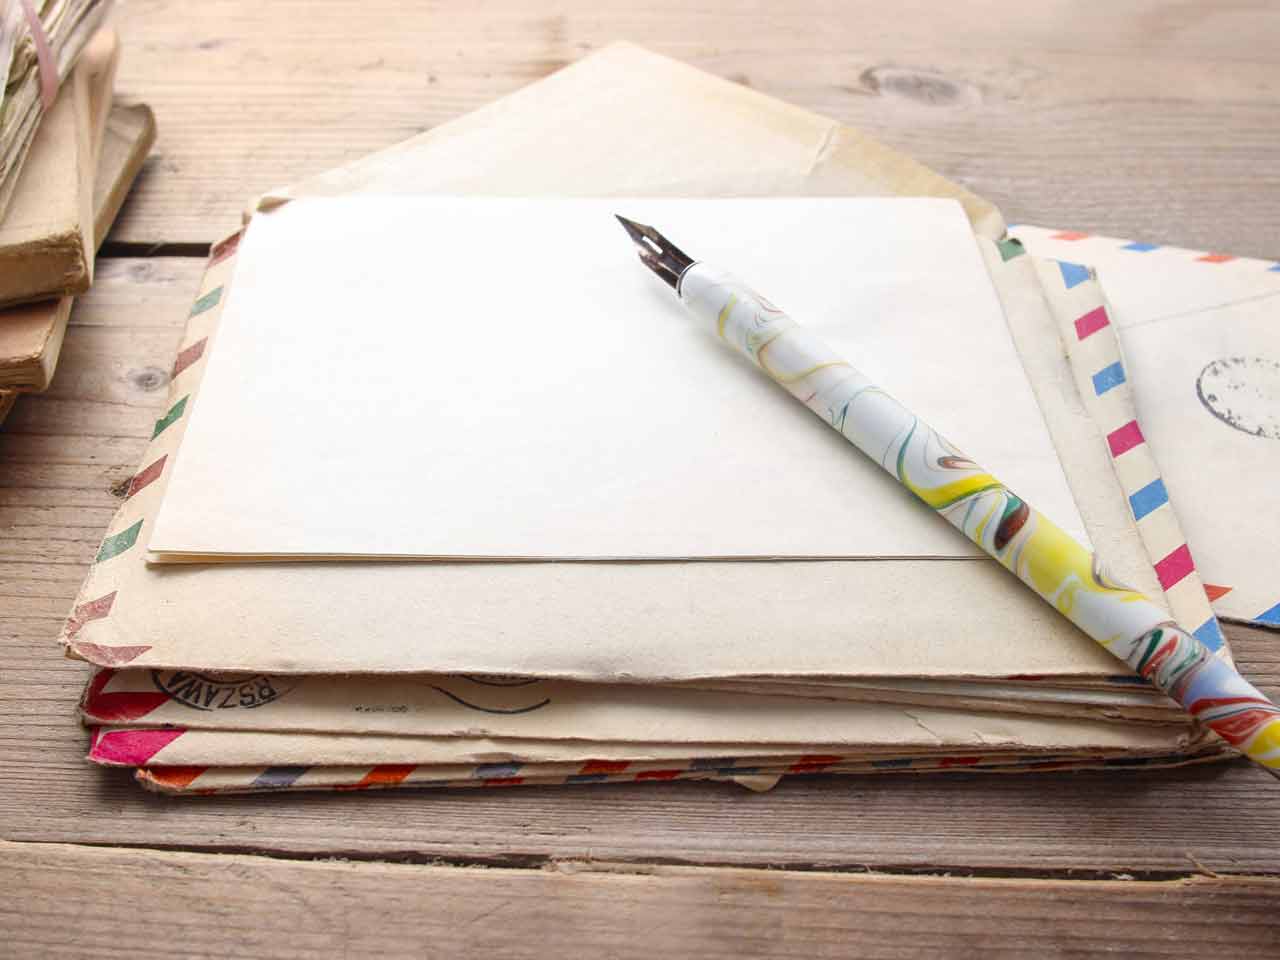 Paper and pen for writing a letter